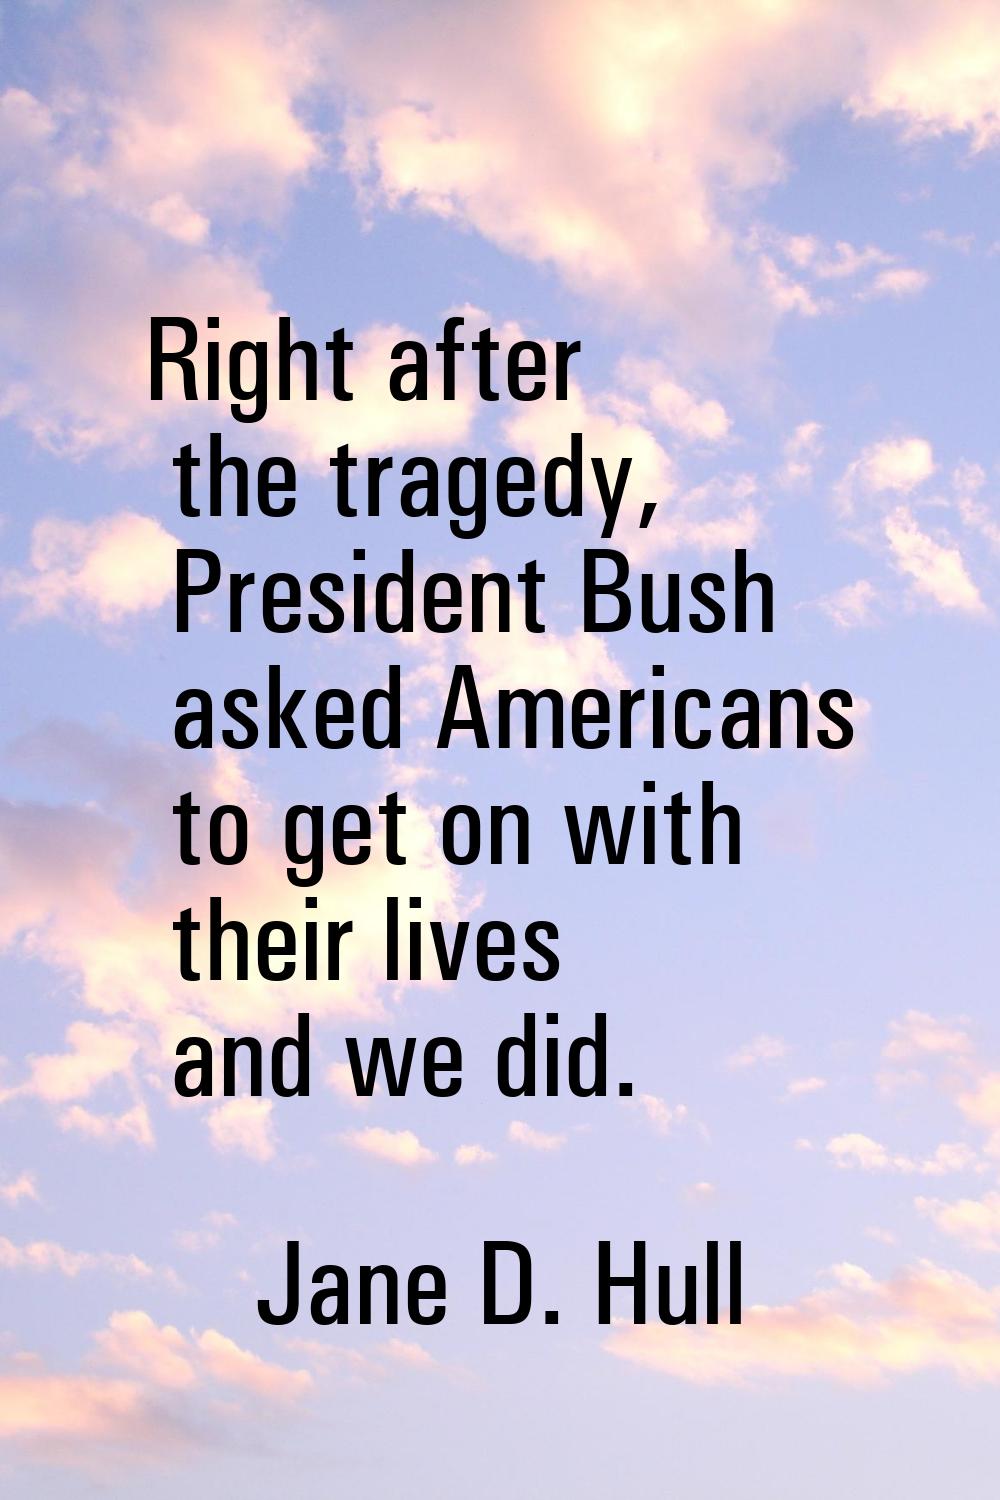 Right after the tragedy, President Bush asked Americans to get on with their lives and we did.